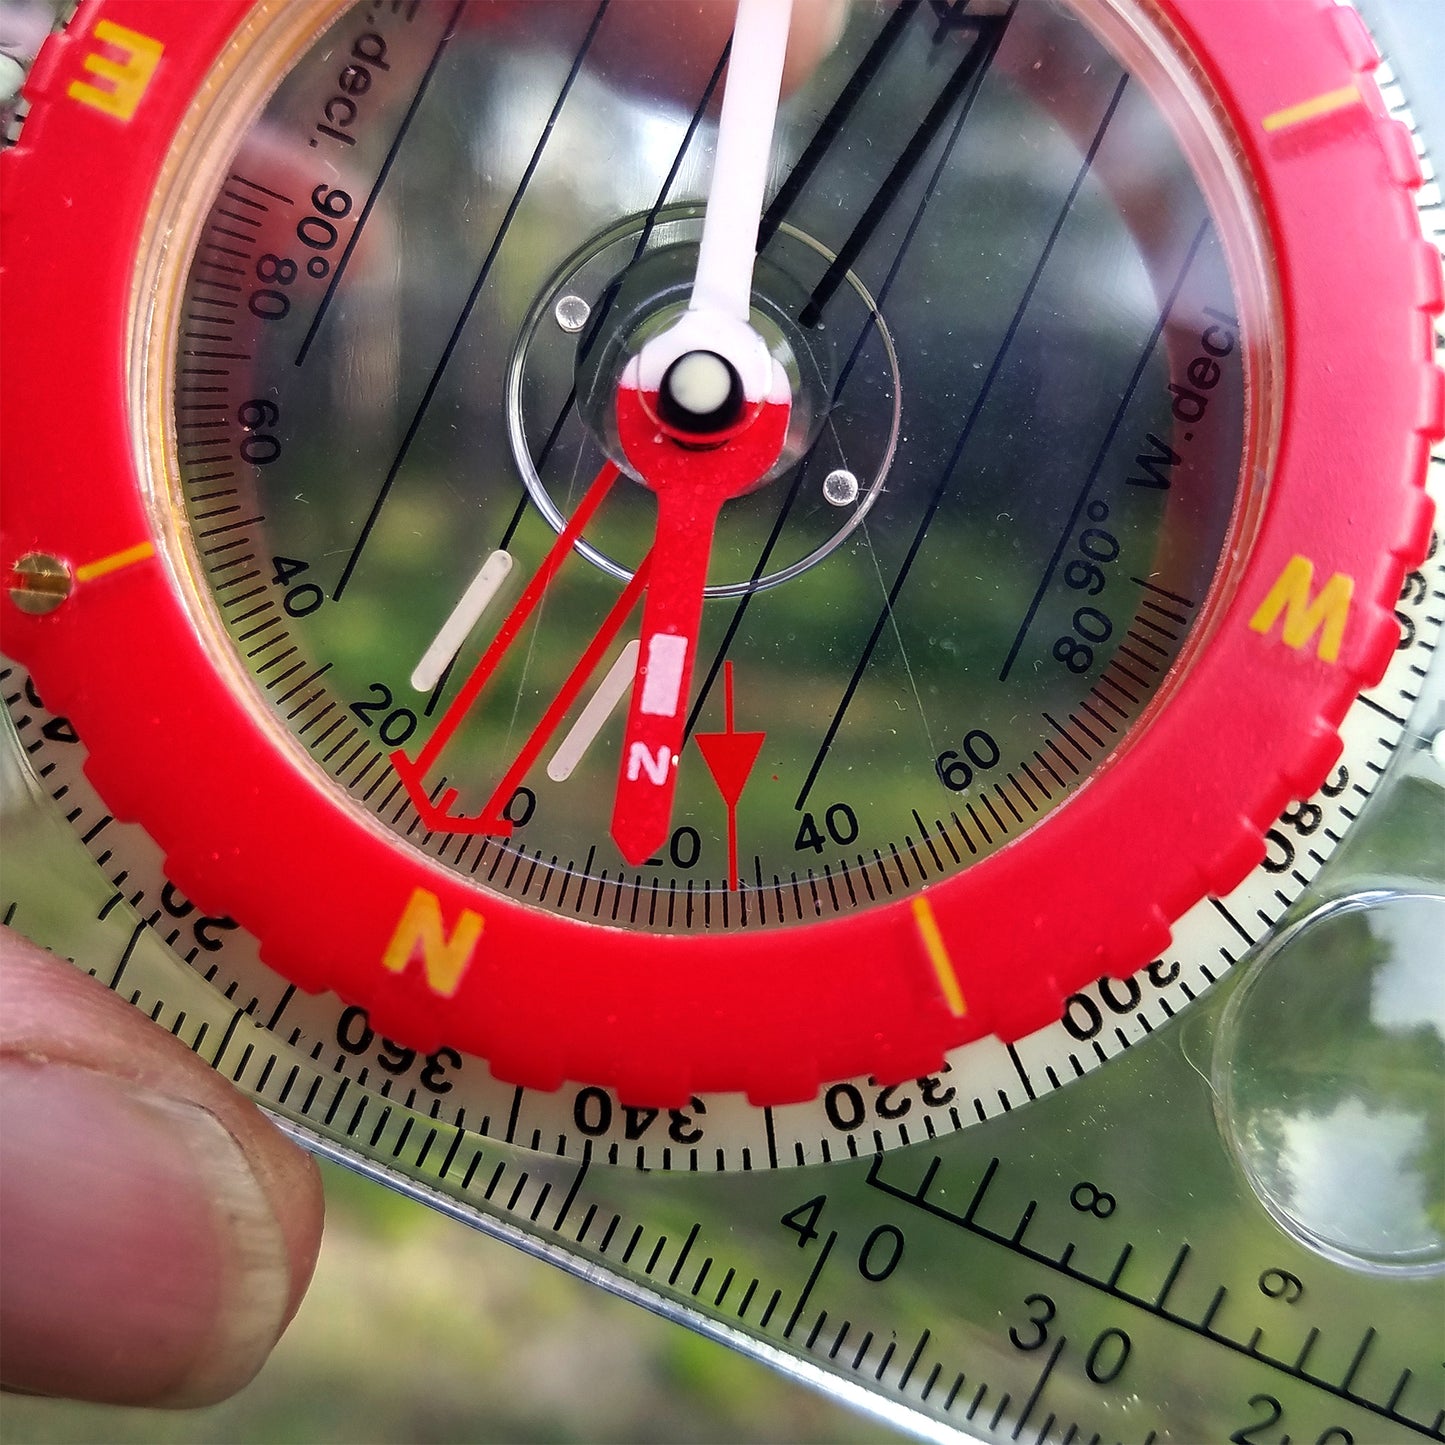 RS46 Compass with Clinometer for measuring the angle of slopes and hillsides